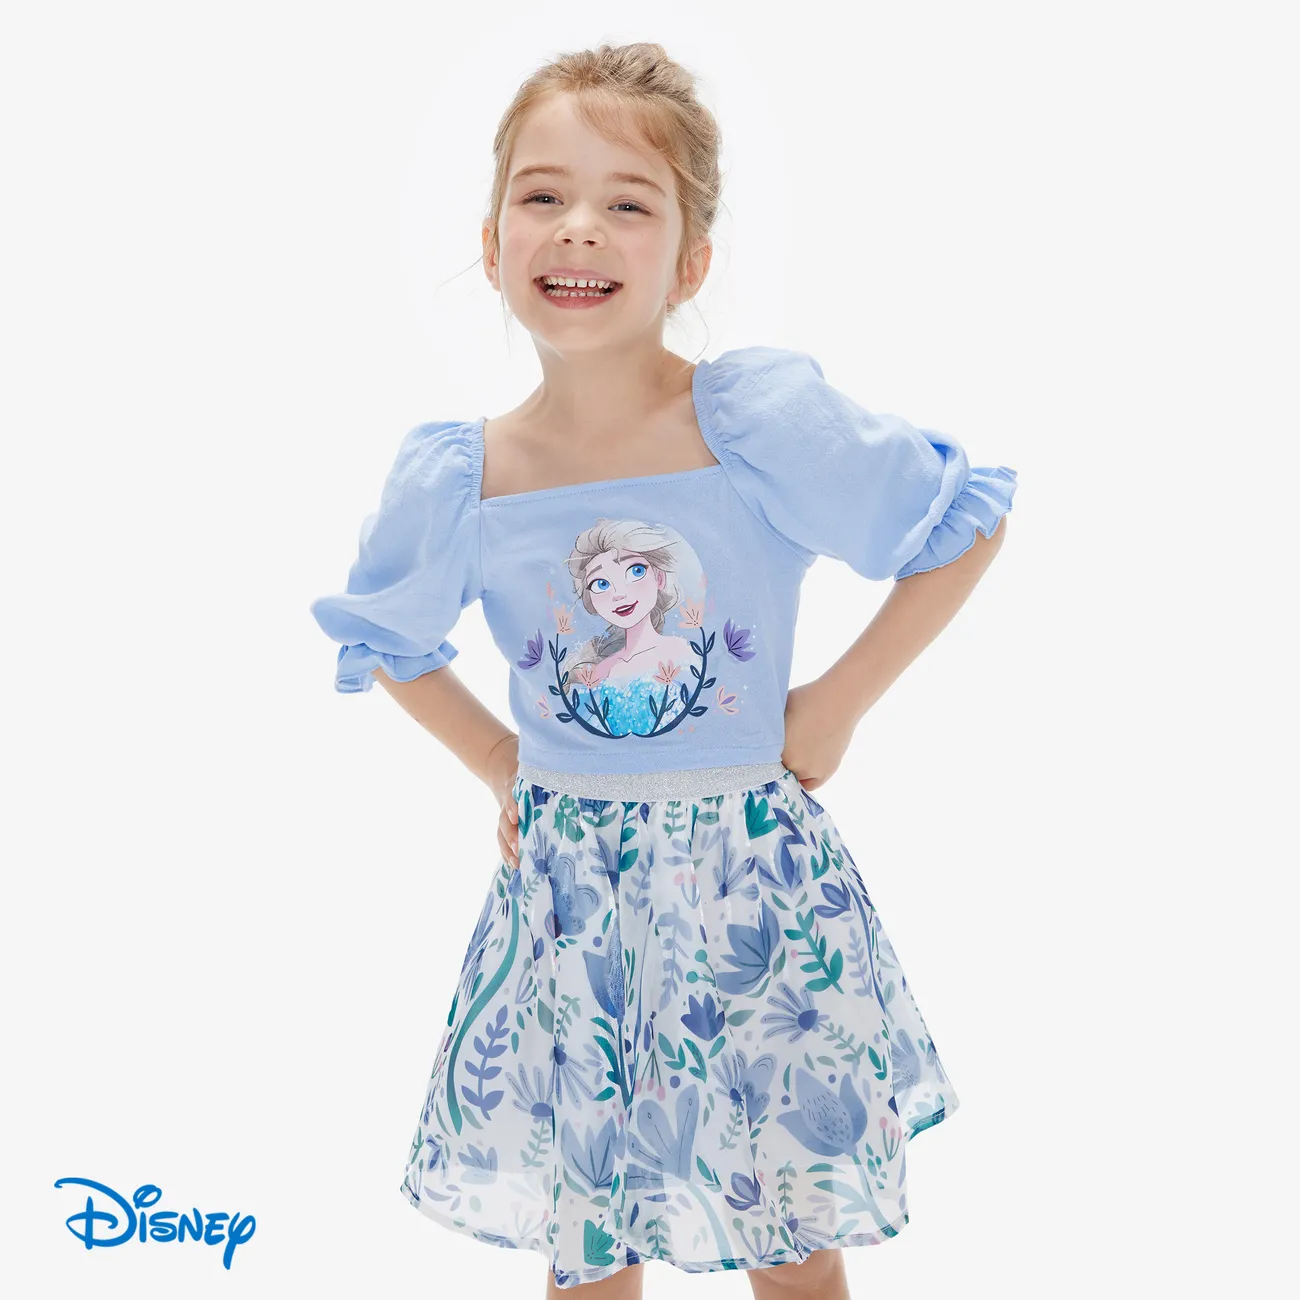 Disney Frozen Elsa/Anna 2pcs Toddler Girls Character Print Puff Sleeves Top with Floral Skirts Set Blue big image 1